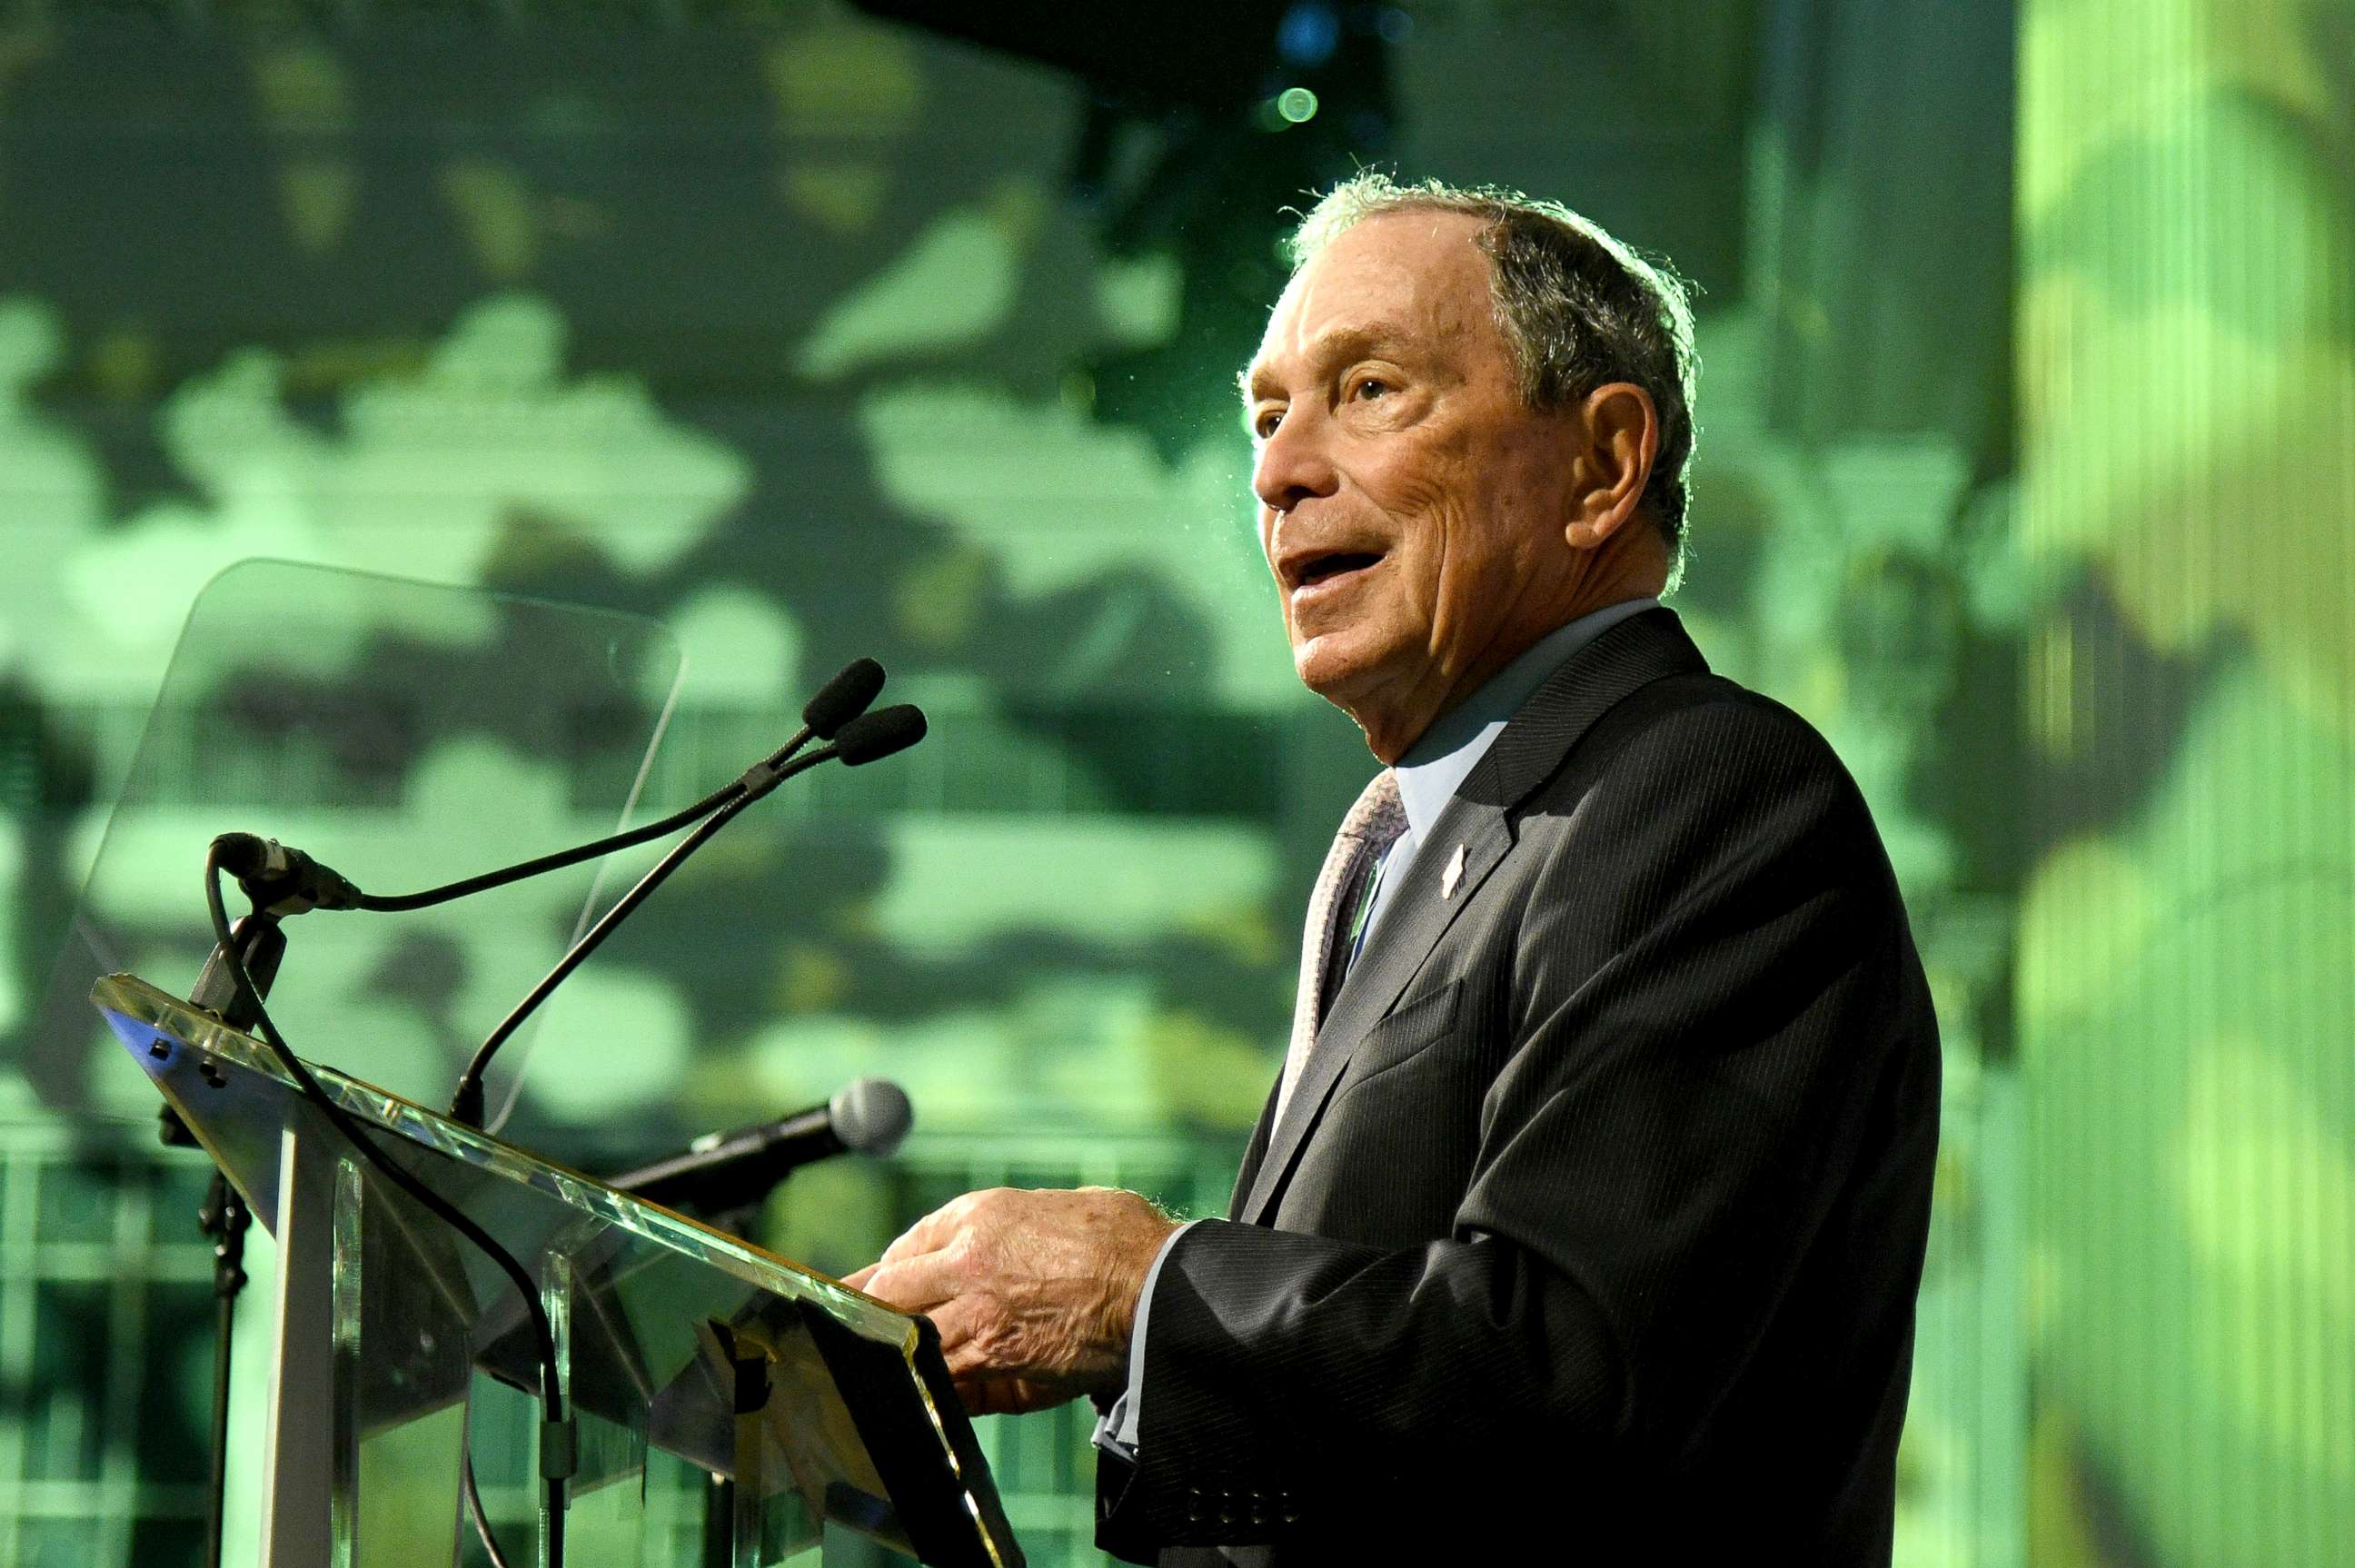 PHOTO: Michael Bloomberg speaks onstage during the Hudson River Park Annual Gala at Cipriani South Street, Oct. 17, 2019, in New York City.